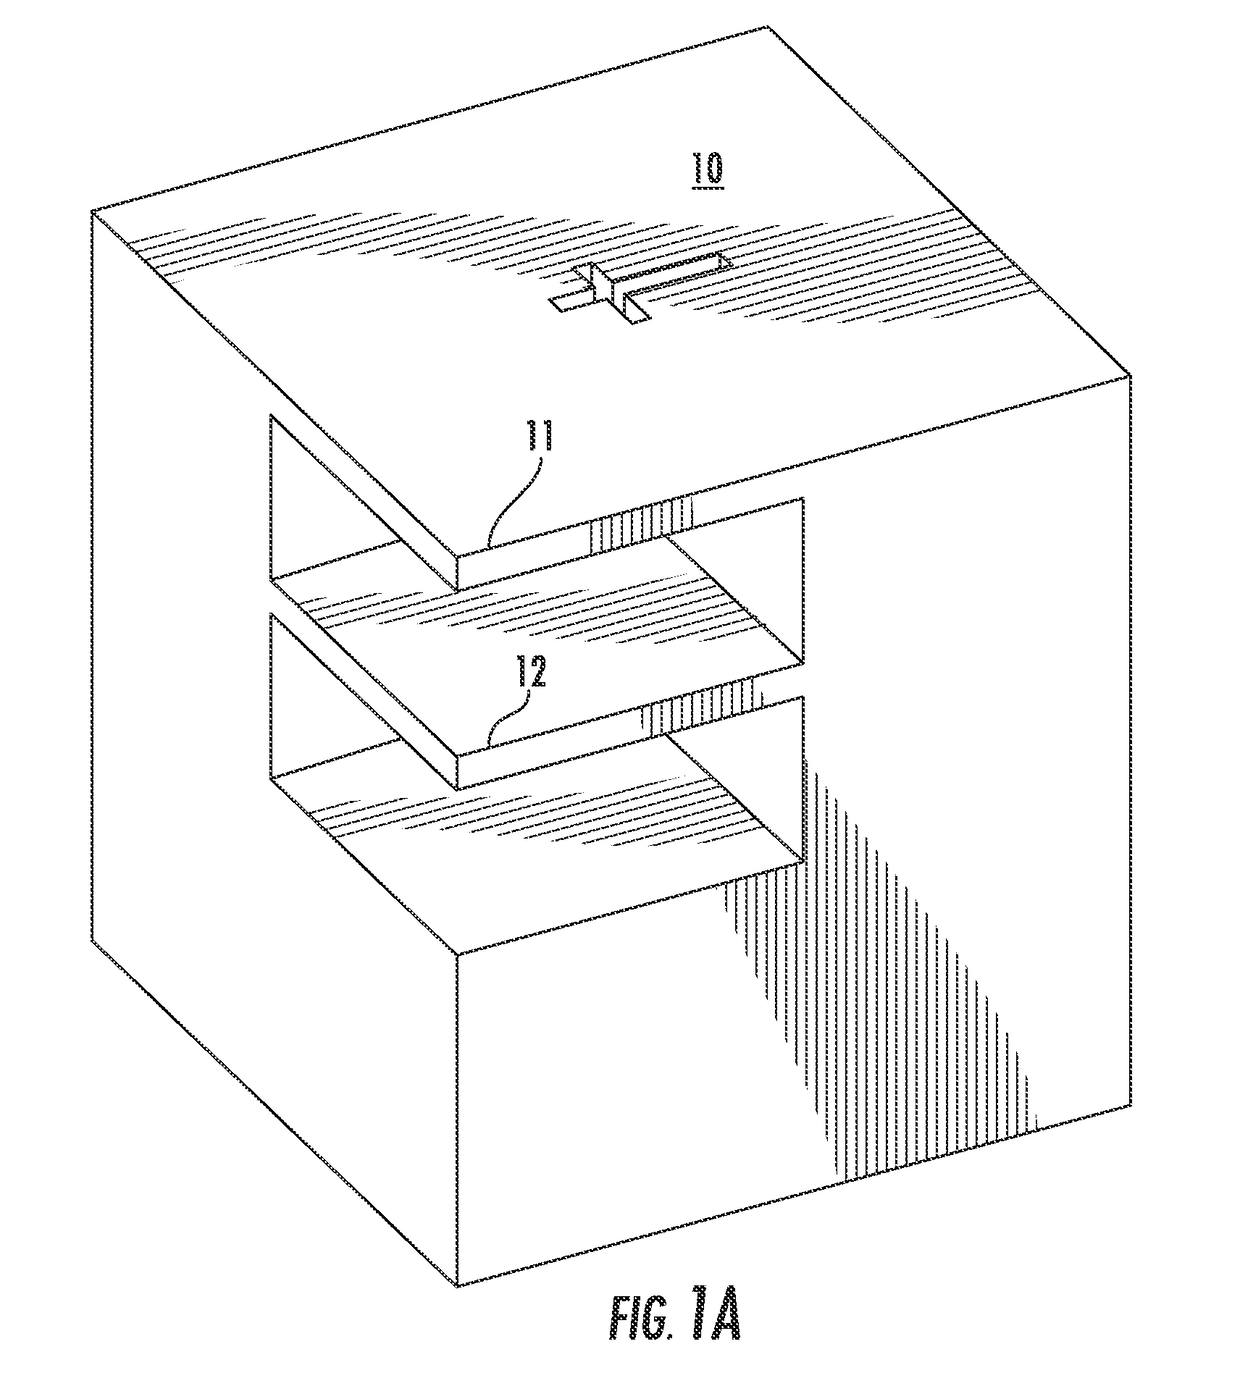 Systems and methods for designing and fabricating contact-free support structures for overhang geometries of parts in powder-bed metal additive manufacturing